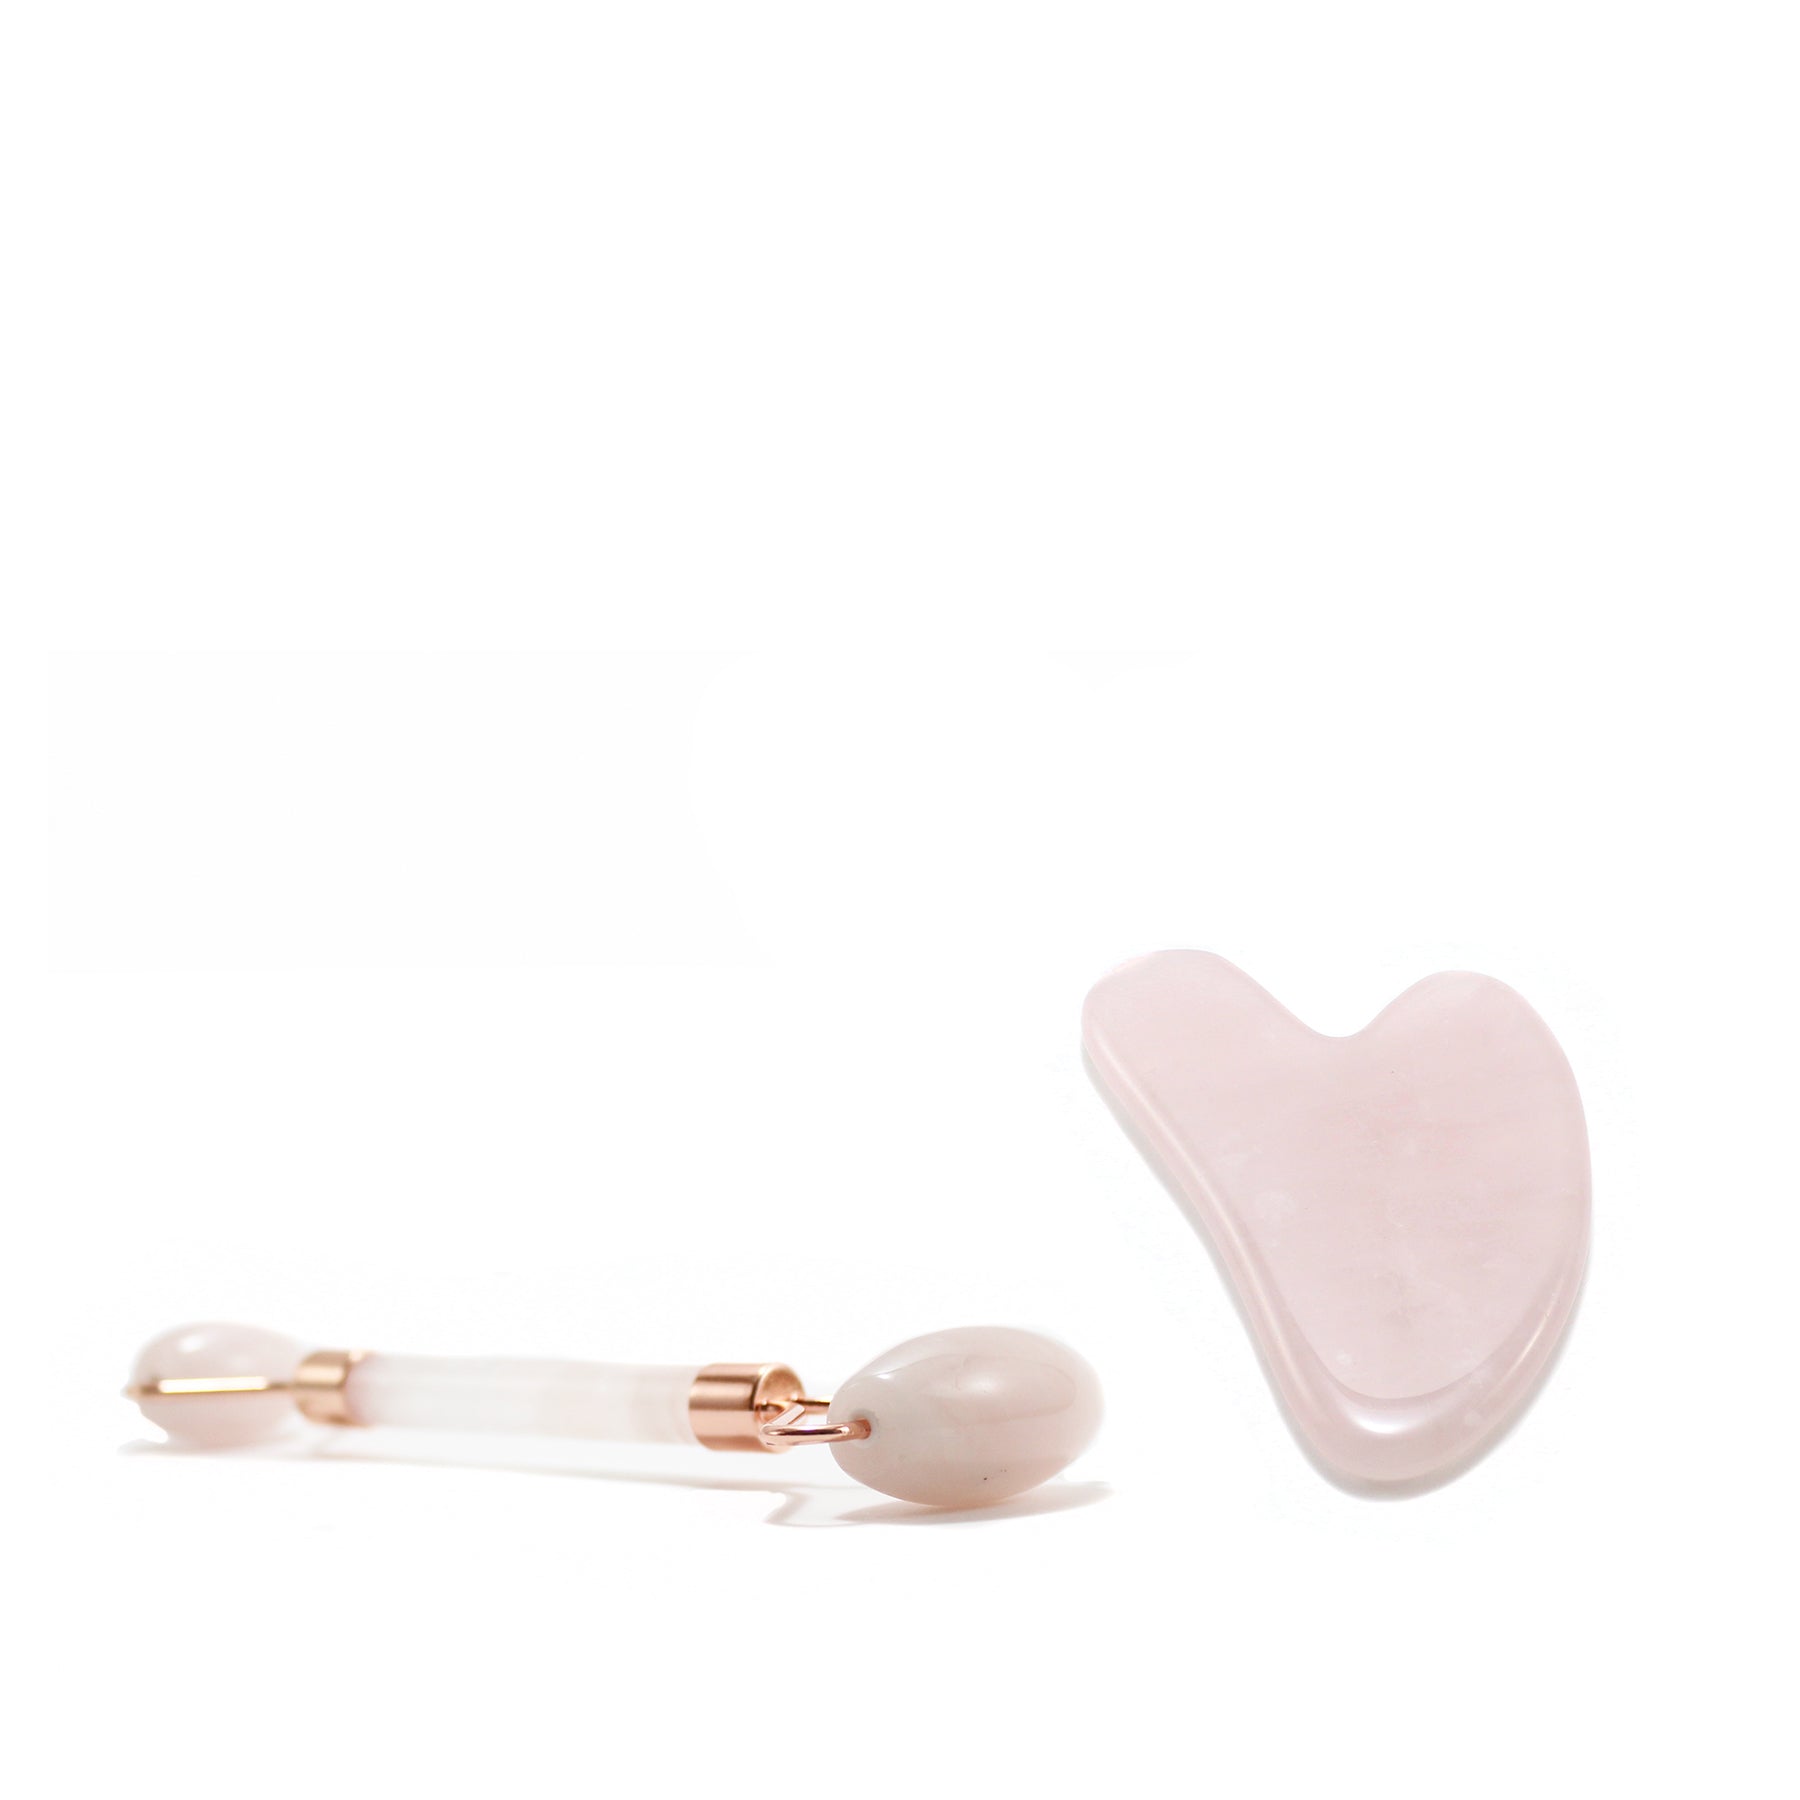 Gift set Gua Sha in the shape of a Heart and Double Roll of Rose Quartz